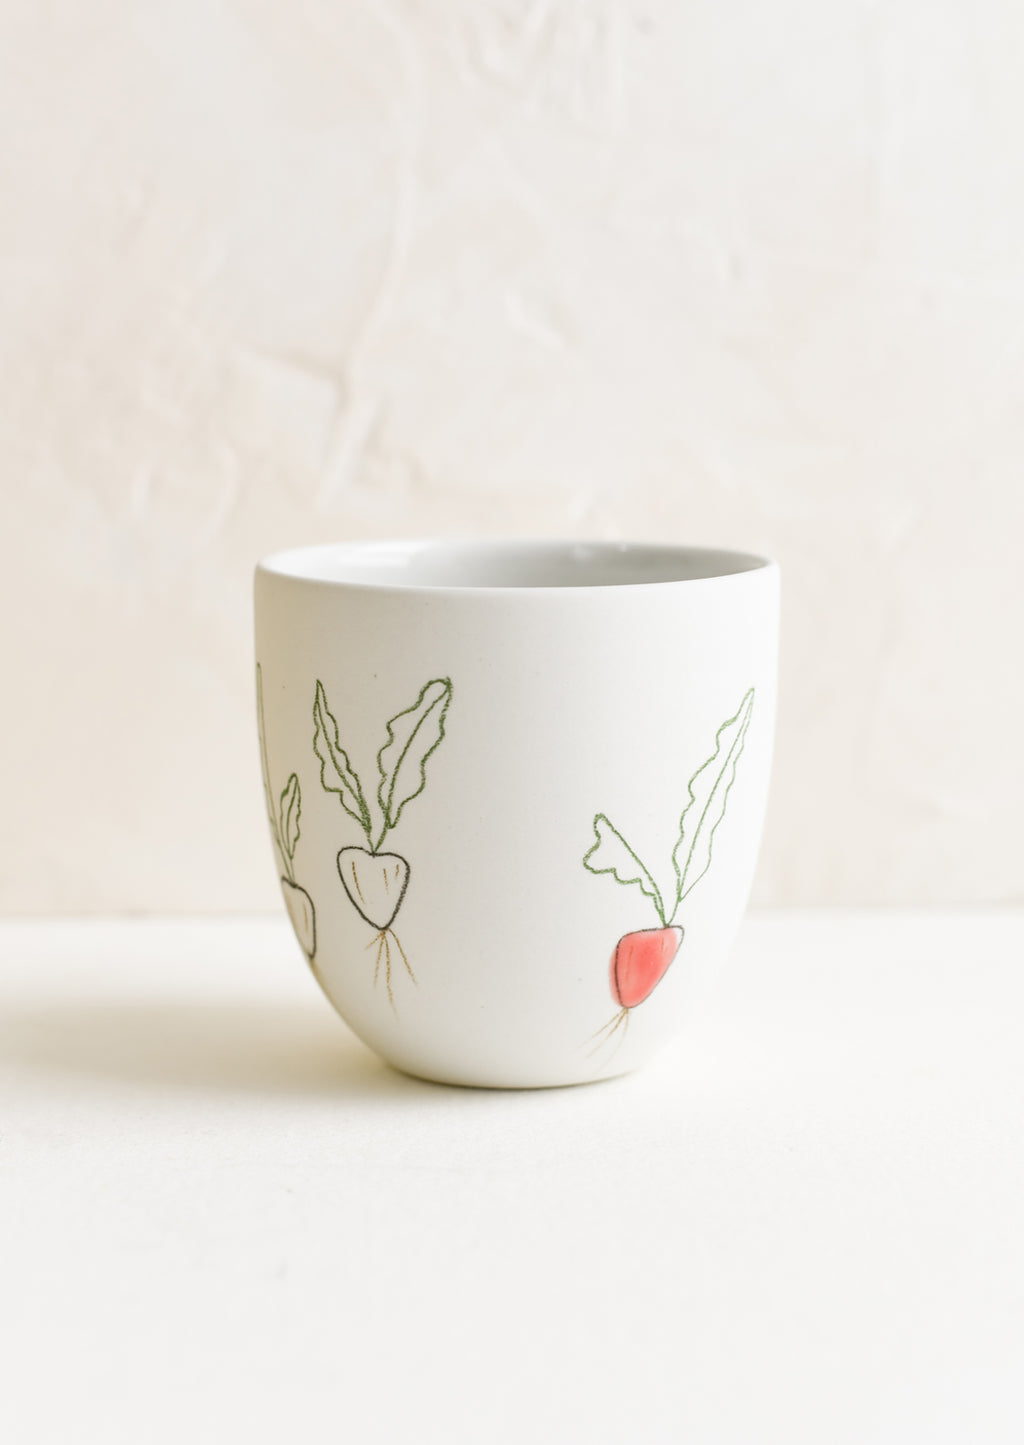 Small / Radish: A small porcelain cup with hand drawn radishes.